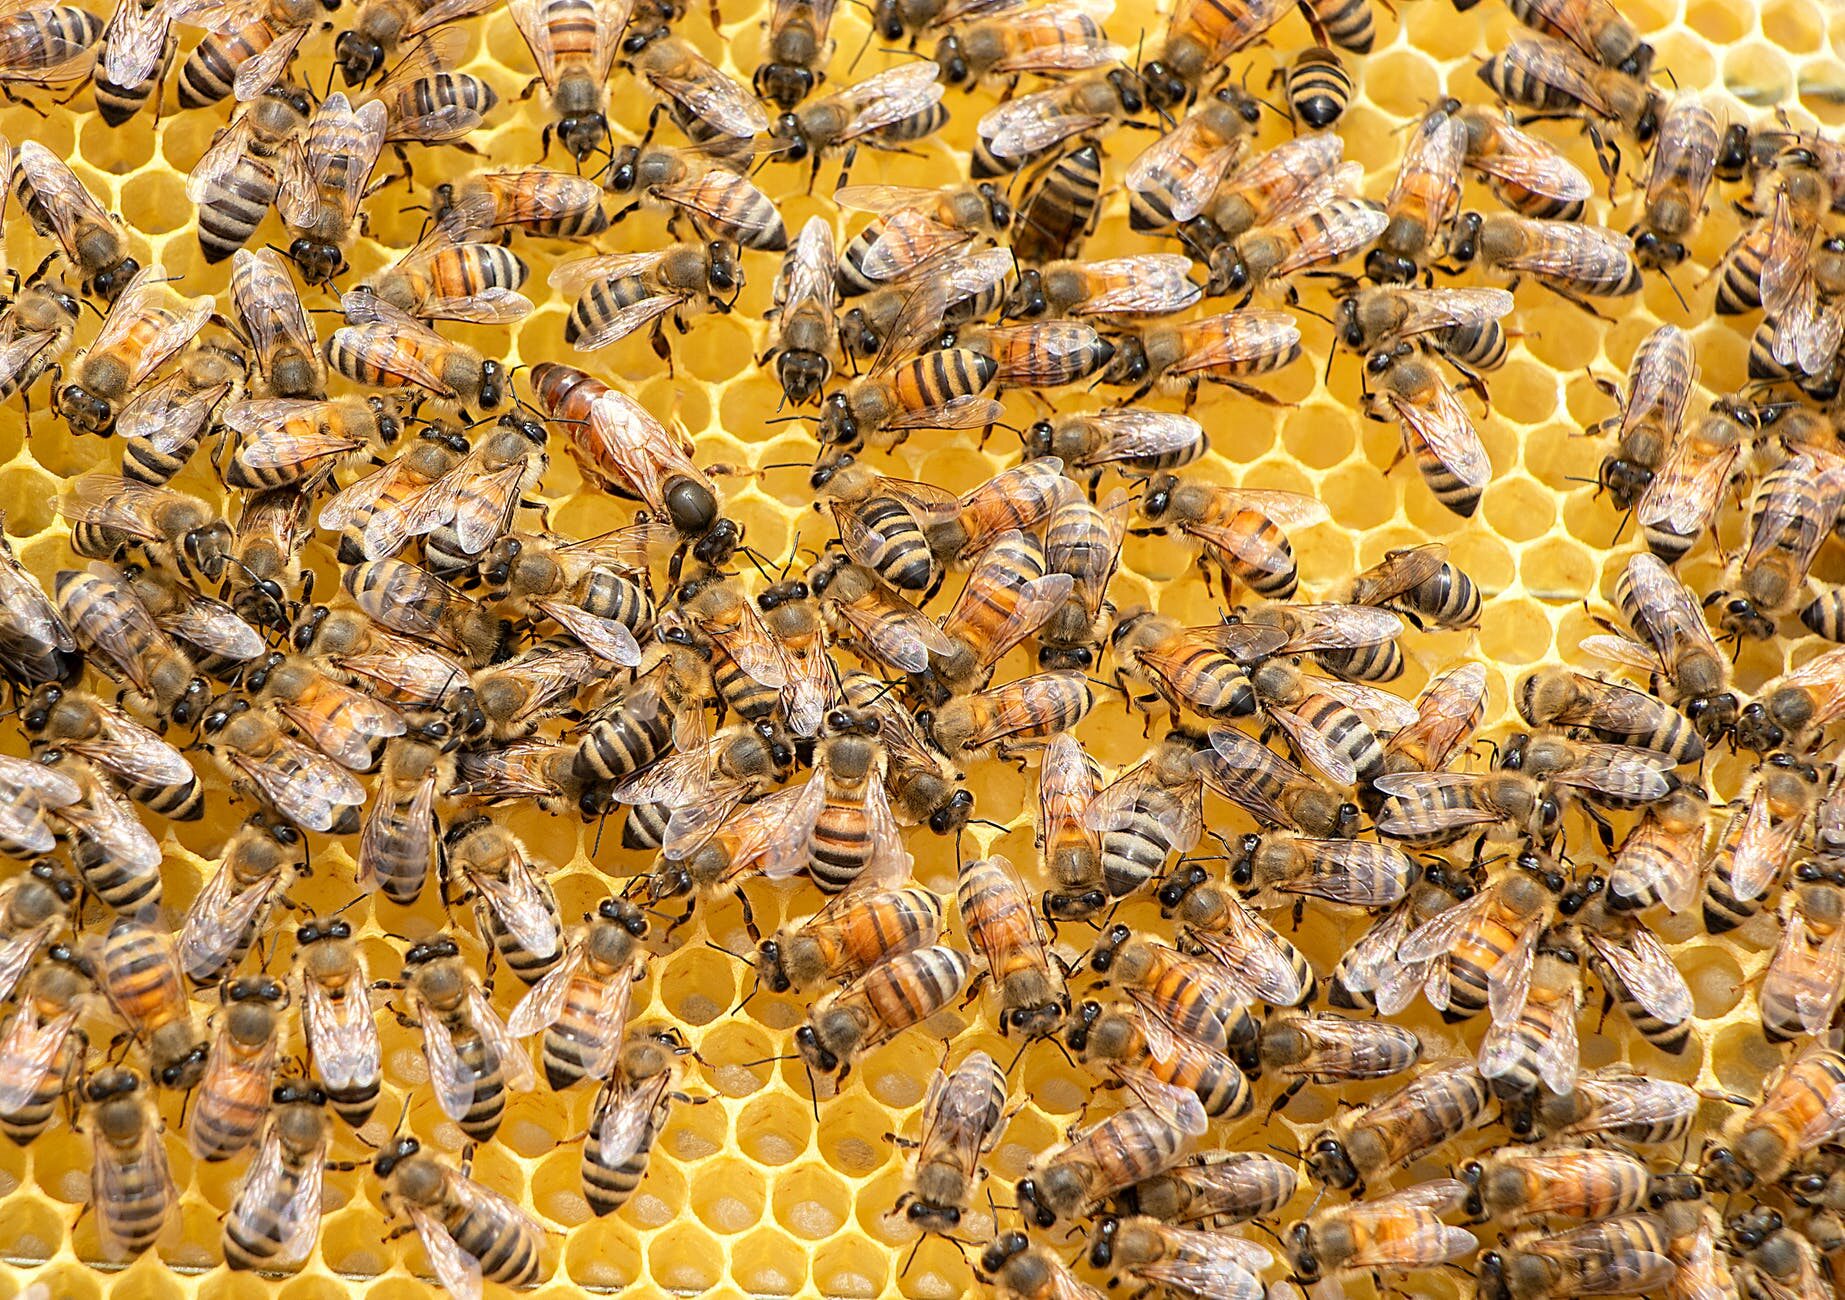 Scientists will check which honey has better quality.  A special apiary was established